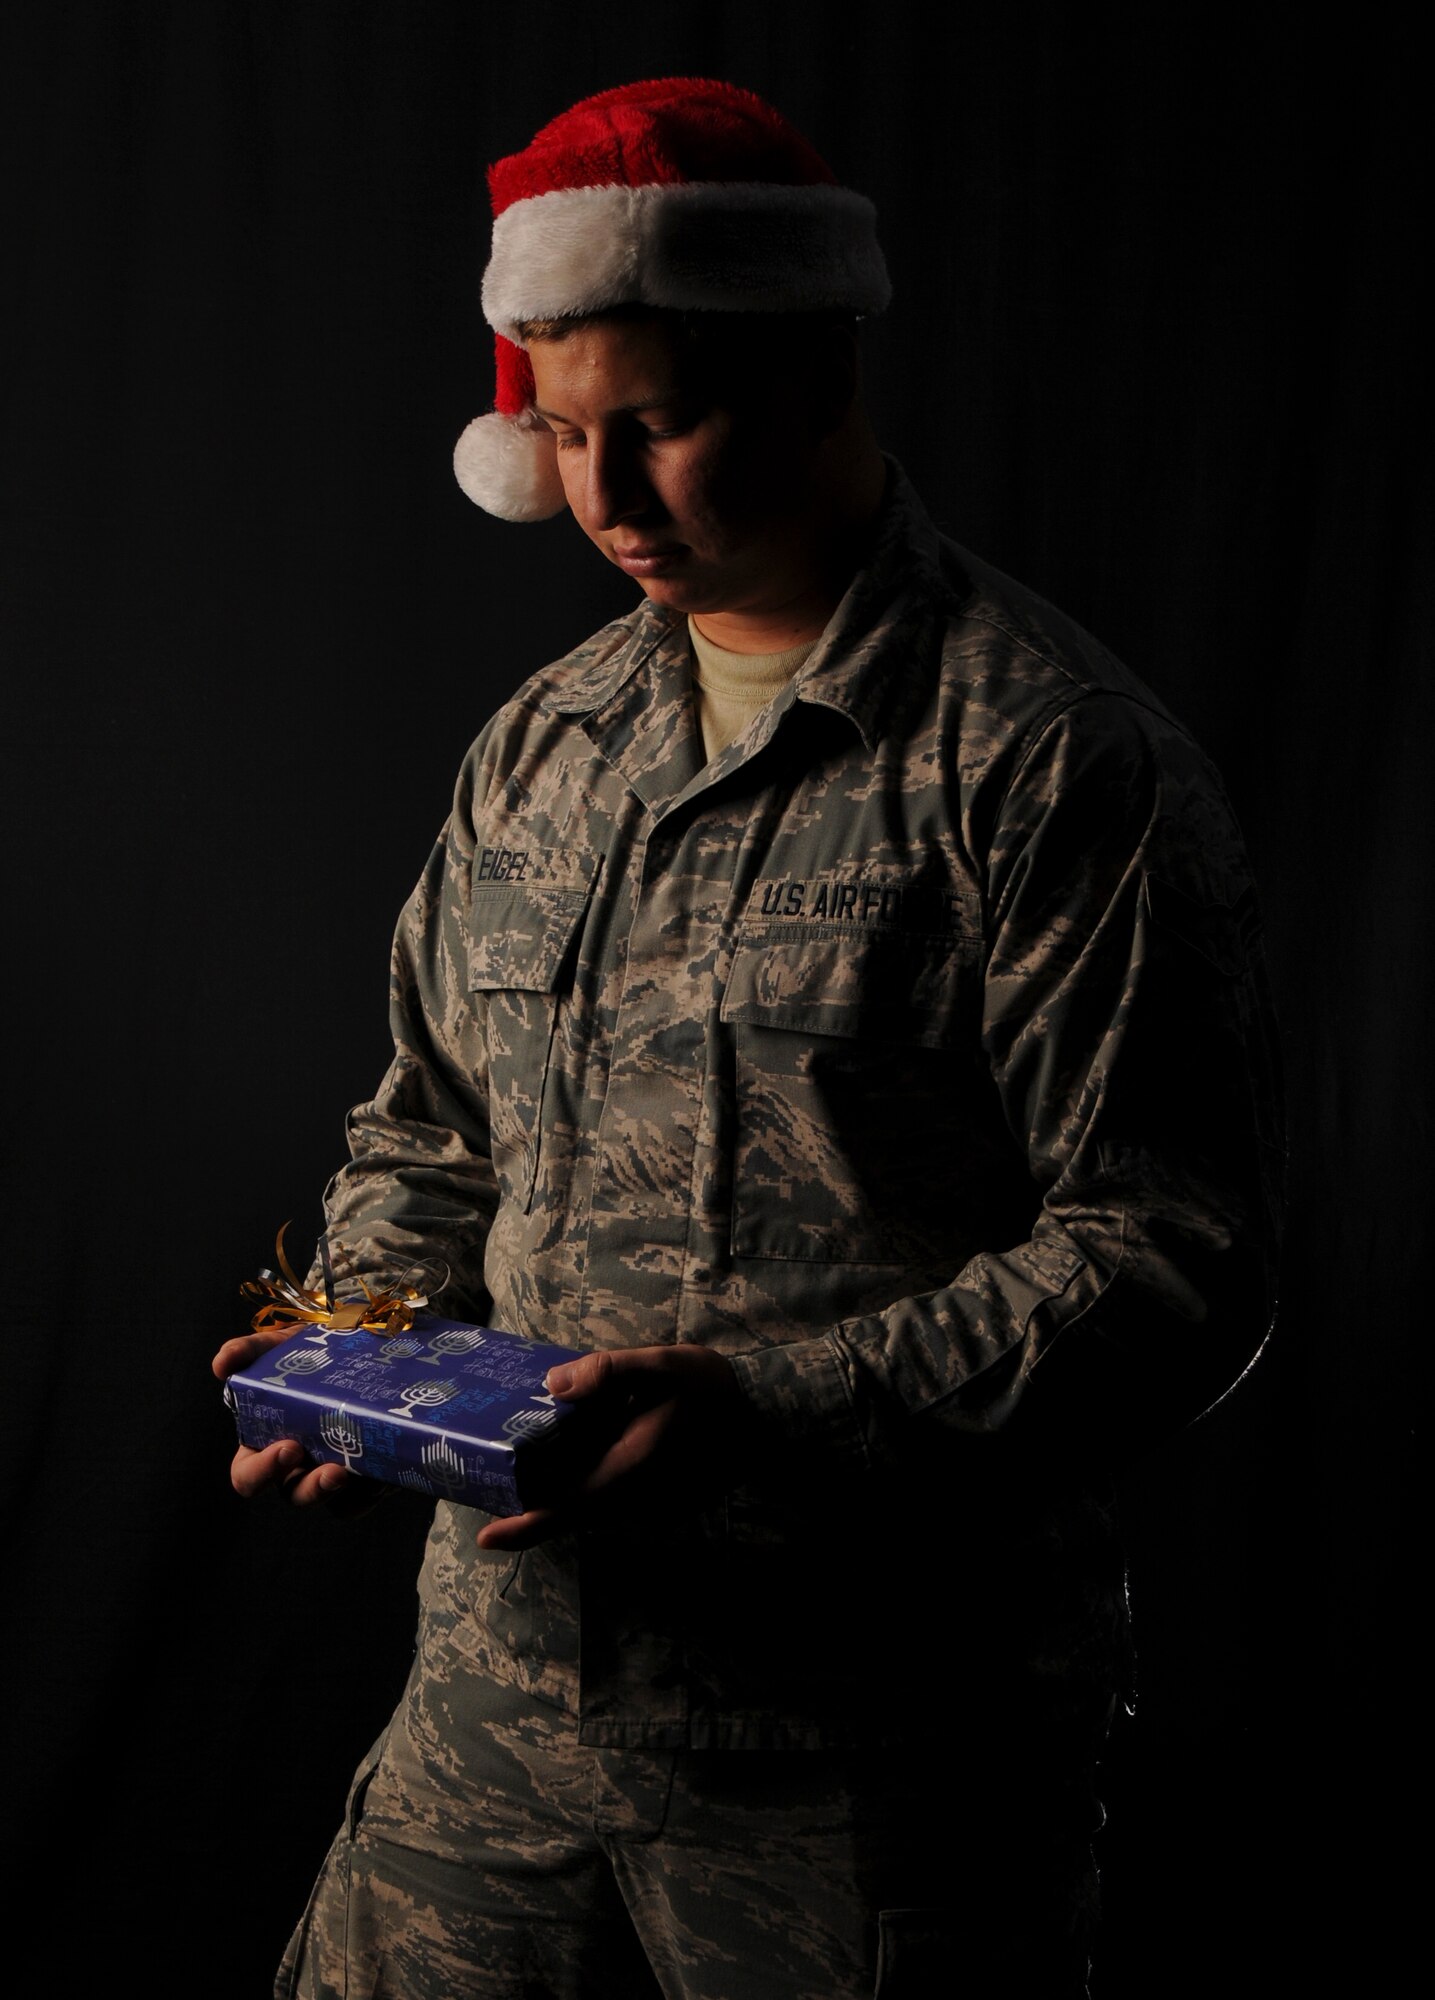 Every year thousands of Airmen spend their holiday season away from family members while stationed overseas. The winter season can inflict higher levels of stress and loneliness in an individual, making it an important time for Airmen to look out for one another. Kadena Air Base mental health and chapel services are available to provide service members and their families with mental and emotional support throughout the year. (U.S. Air Force photo illustration by Airman 1st Class John Linzmeier)